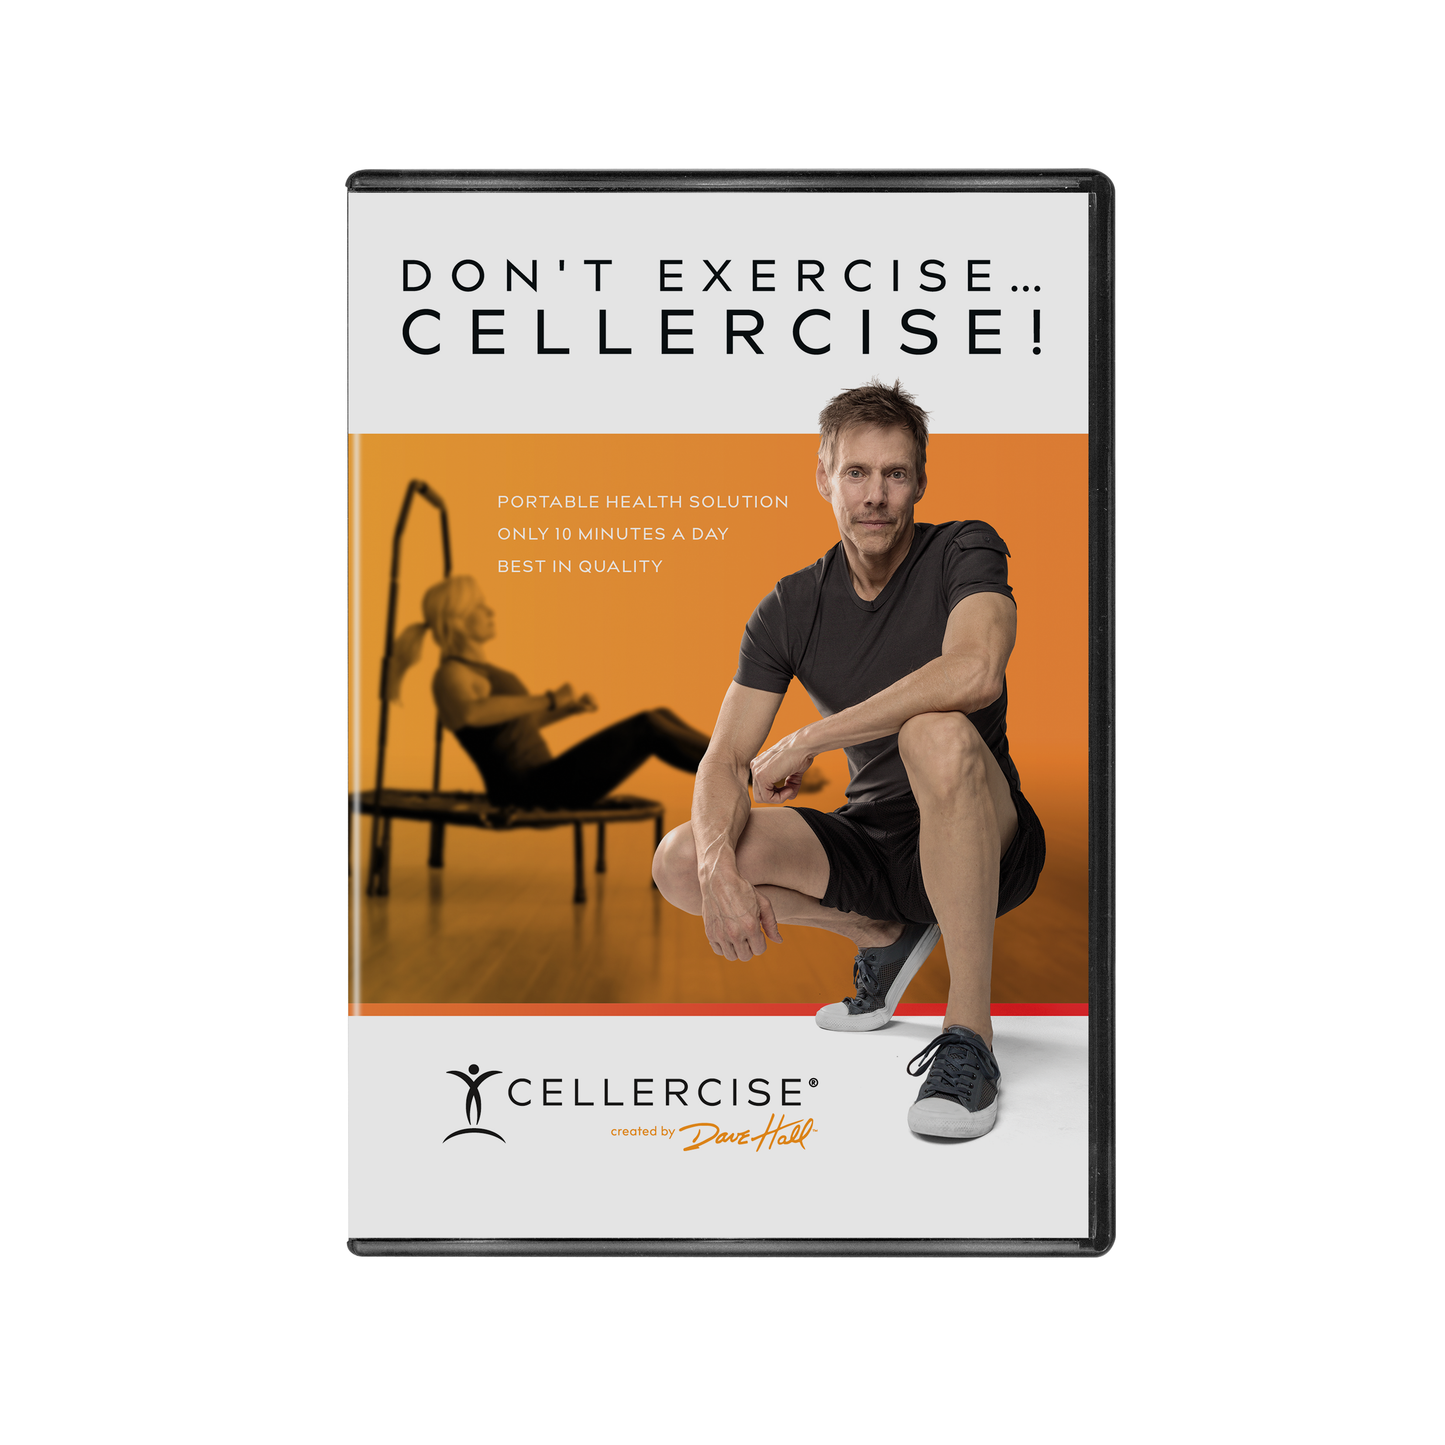 cellercise rebounder mini trampoline home gym workout video dvd exercises fitness download